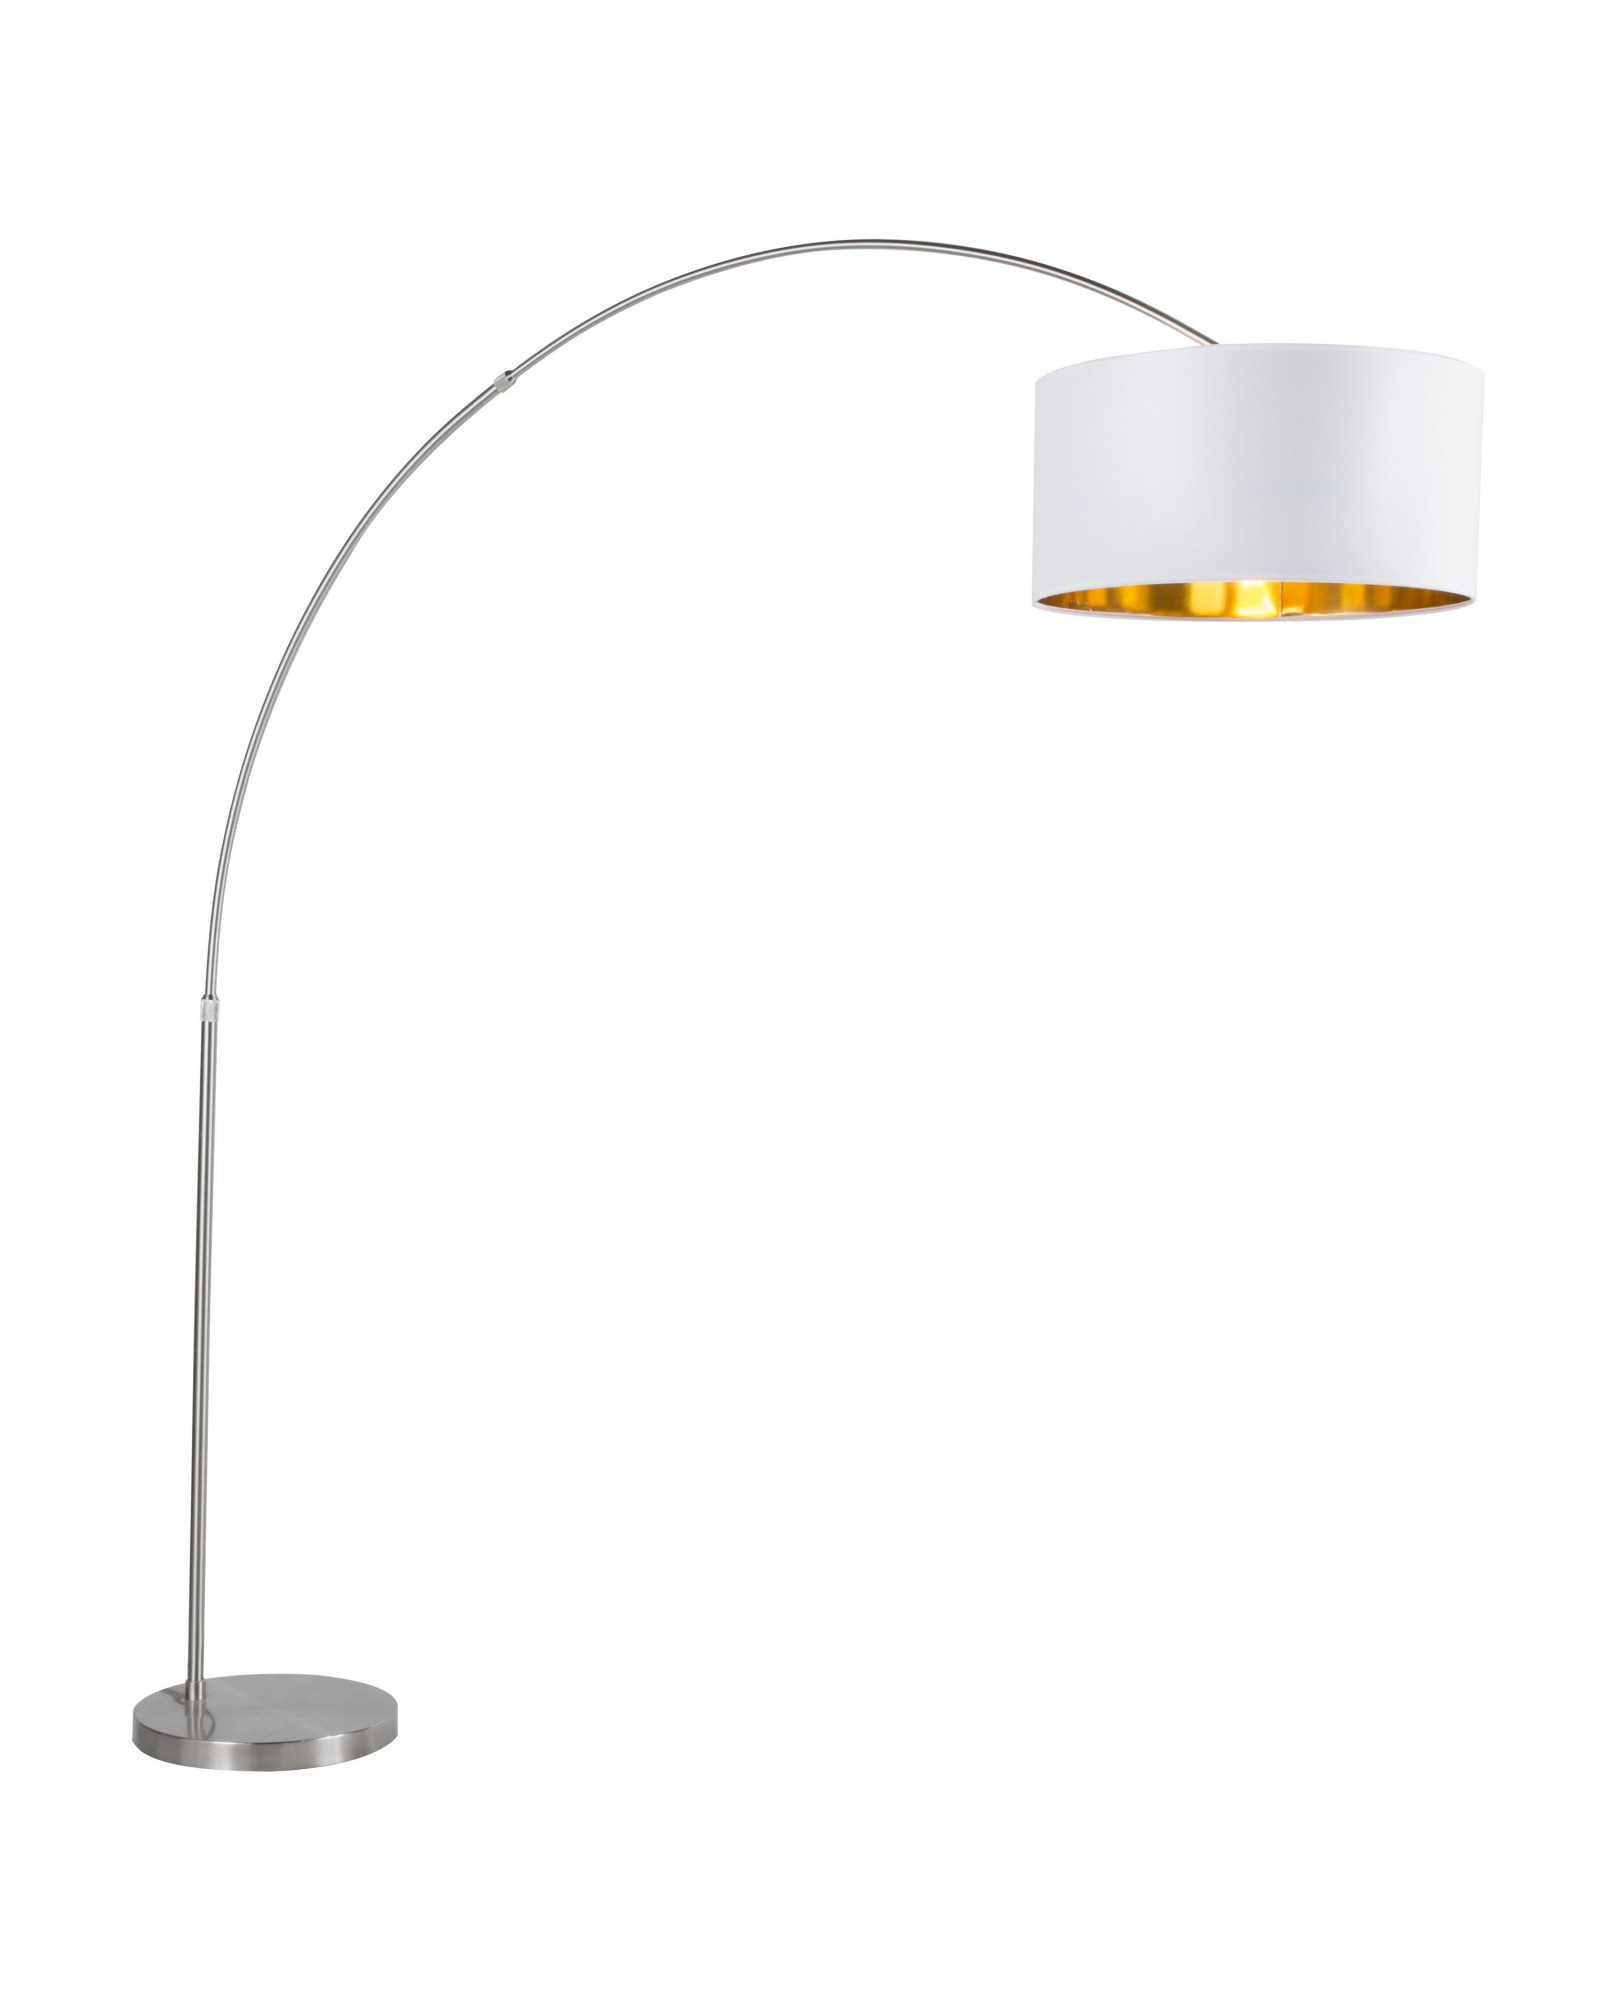 Salon Contemporary Floor Lamp with Satin Nickel Base and White Shade with Gold Accent